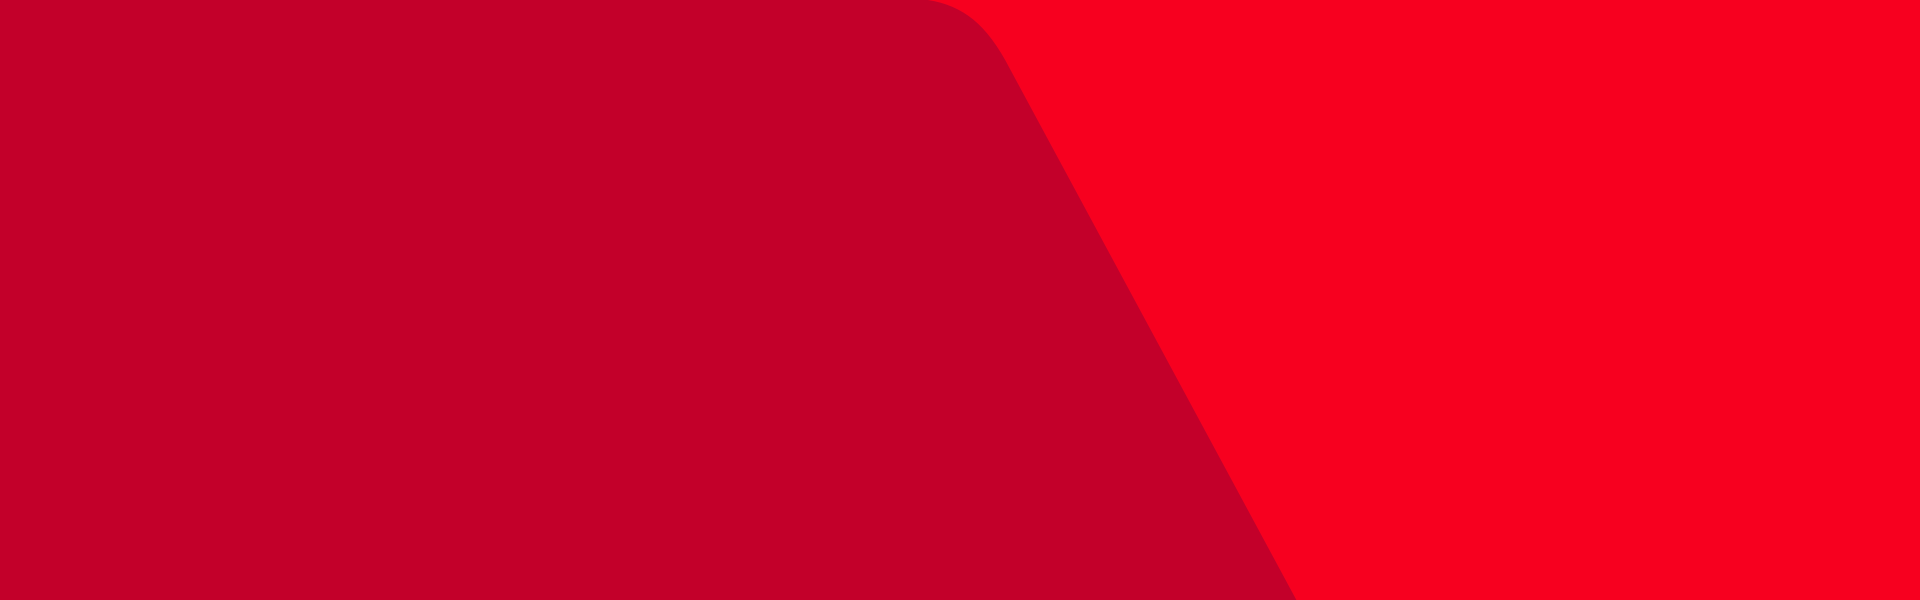 Horizontal, two-toned red graphic